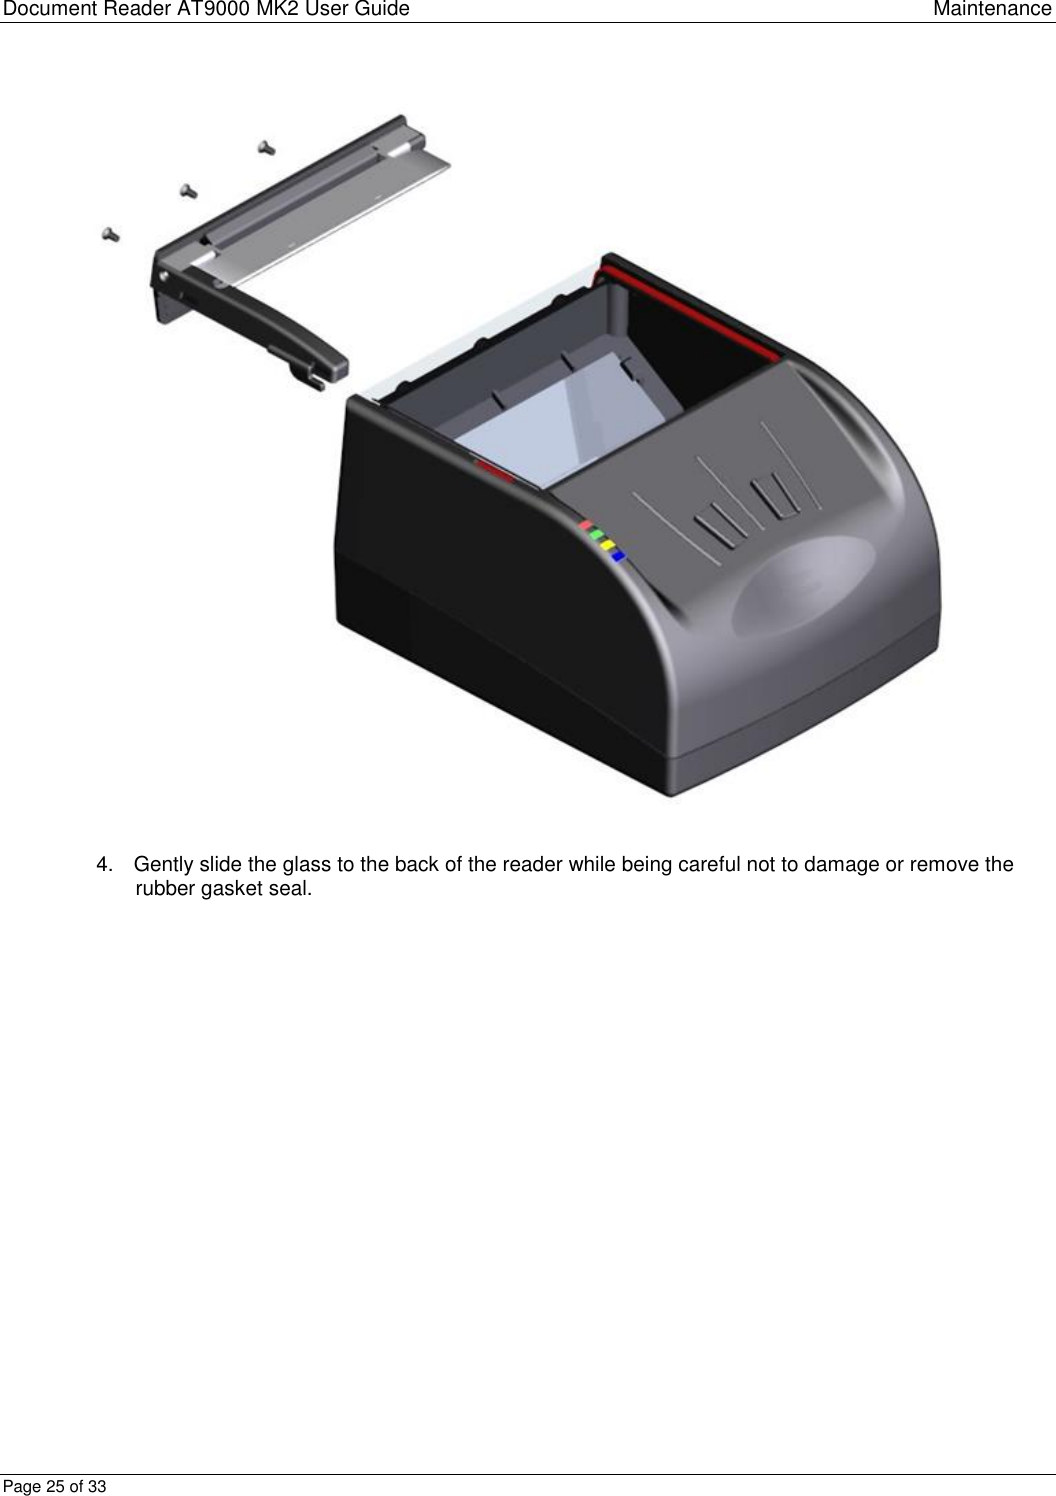 Document Reader AT9000 MK2 User Guide Maintenance Page 25 of 33  4.  Gently slide the glass to the back of the reader while being careful not to damage or remove the rubber gasket seal. 